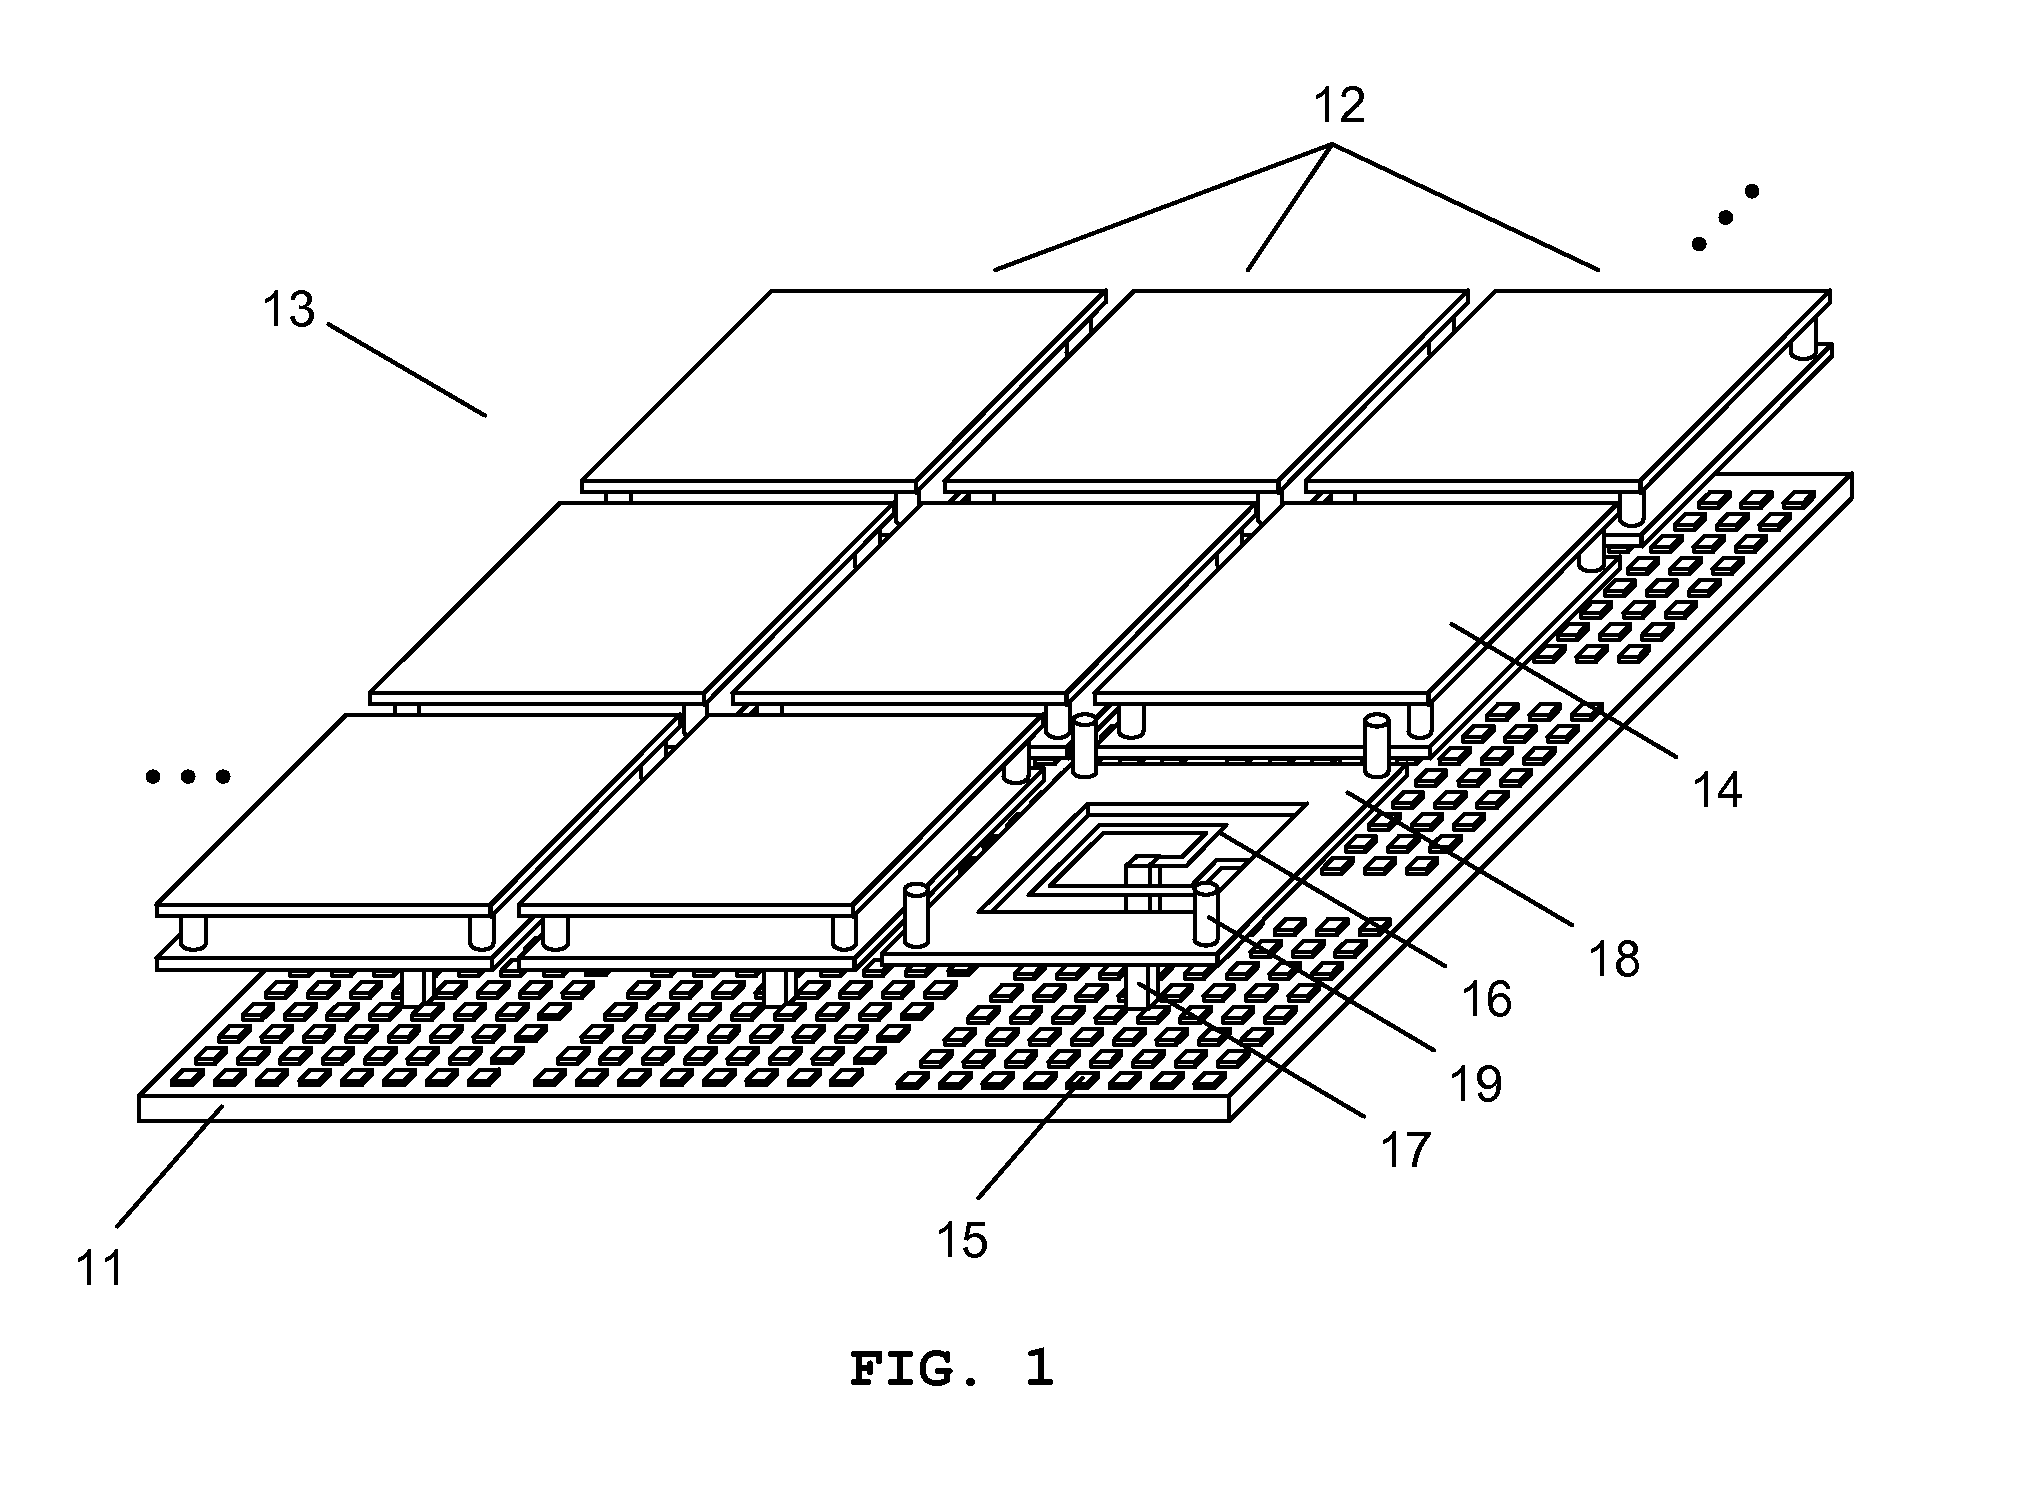 Discretely controlled micromirror array device with segmented electrodes